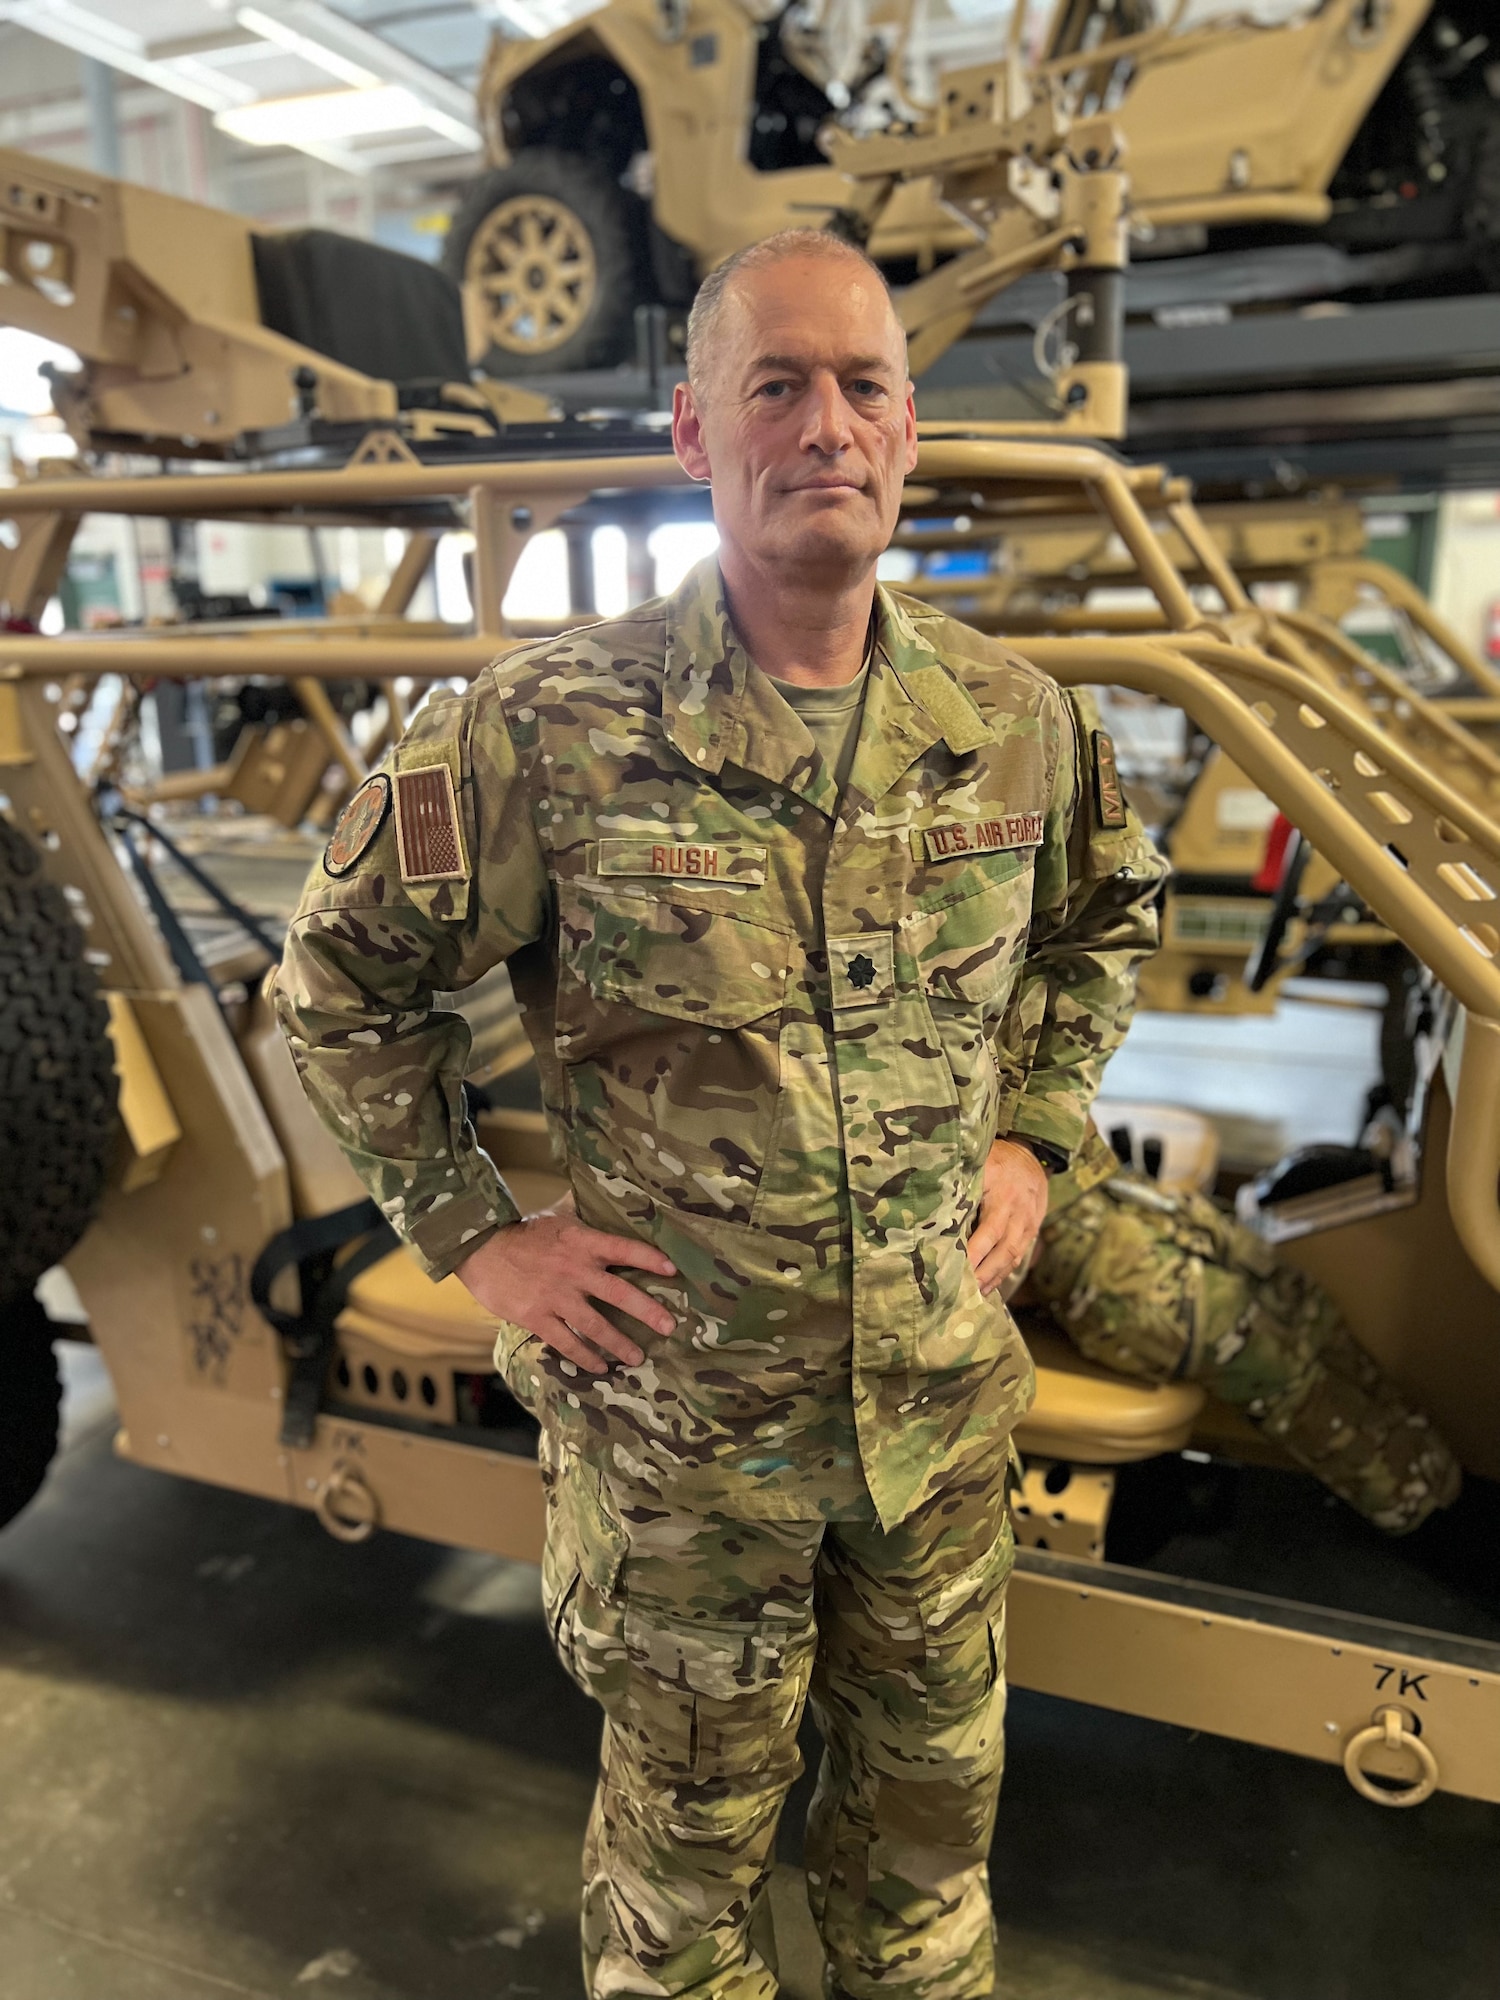 U.S. Air Force Lt. Col. Stephen "Doc" Rush, medical group commander for the 106th Rescue Wing  who took part as a medical advisor in the 2018 Thai Cave rescue pictured here in the 103rd Rescue Squadron boat barn at F.S. Gabreski Air National Guard Base, Westhampton Beach, N.Y. on Aug. 11, 2022 (U.S. Air National Guard photo by Maj. Michael O'Hagan)